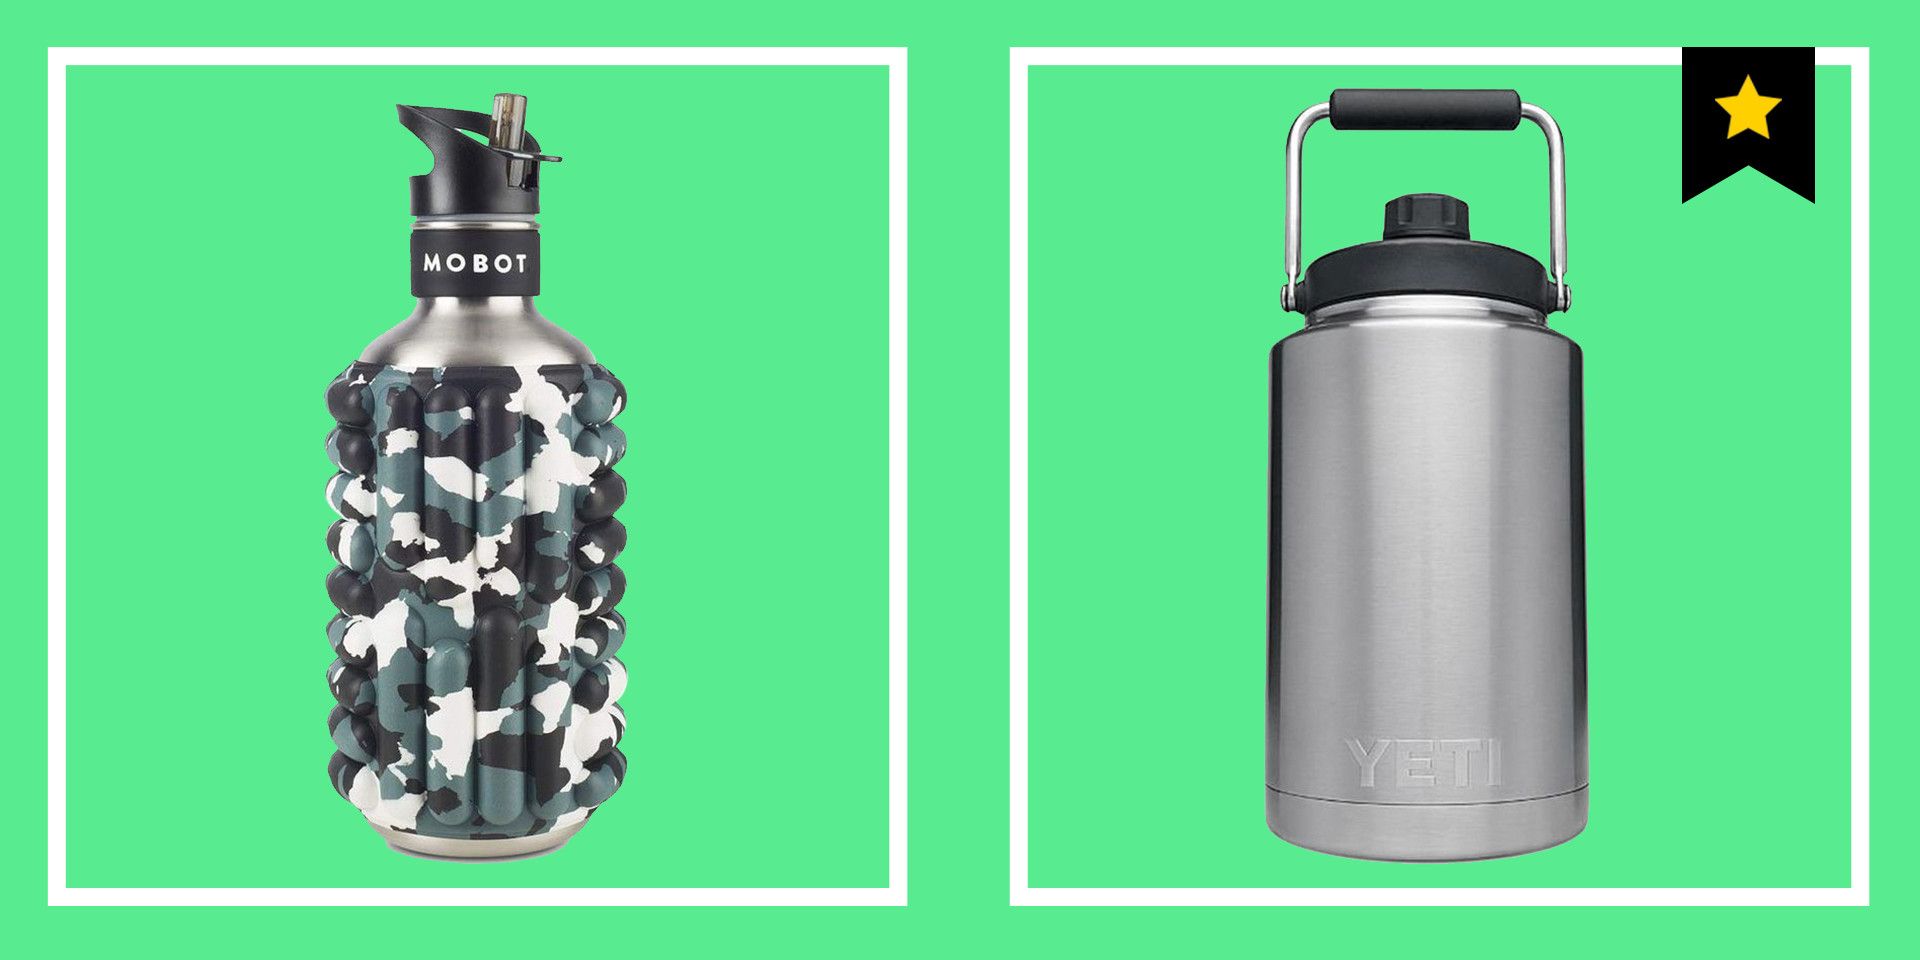 stainless steel flask 2 litre